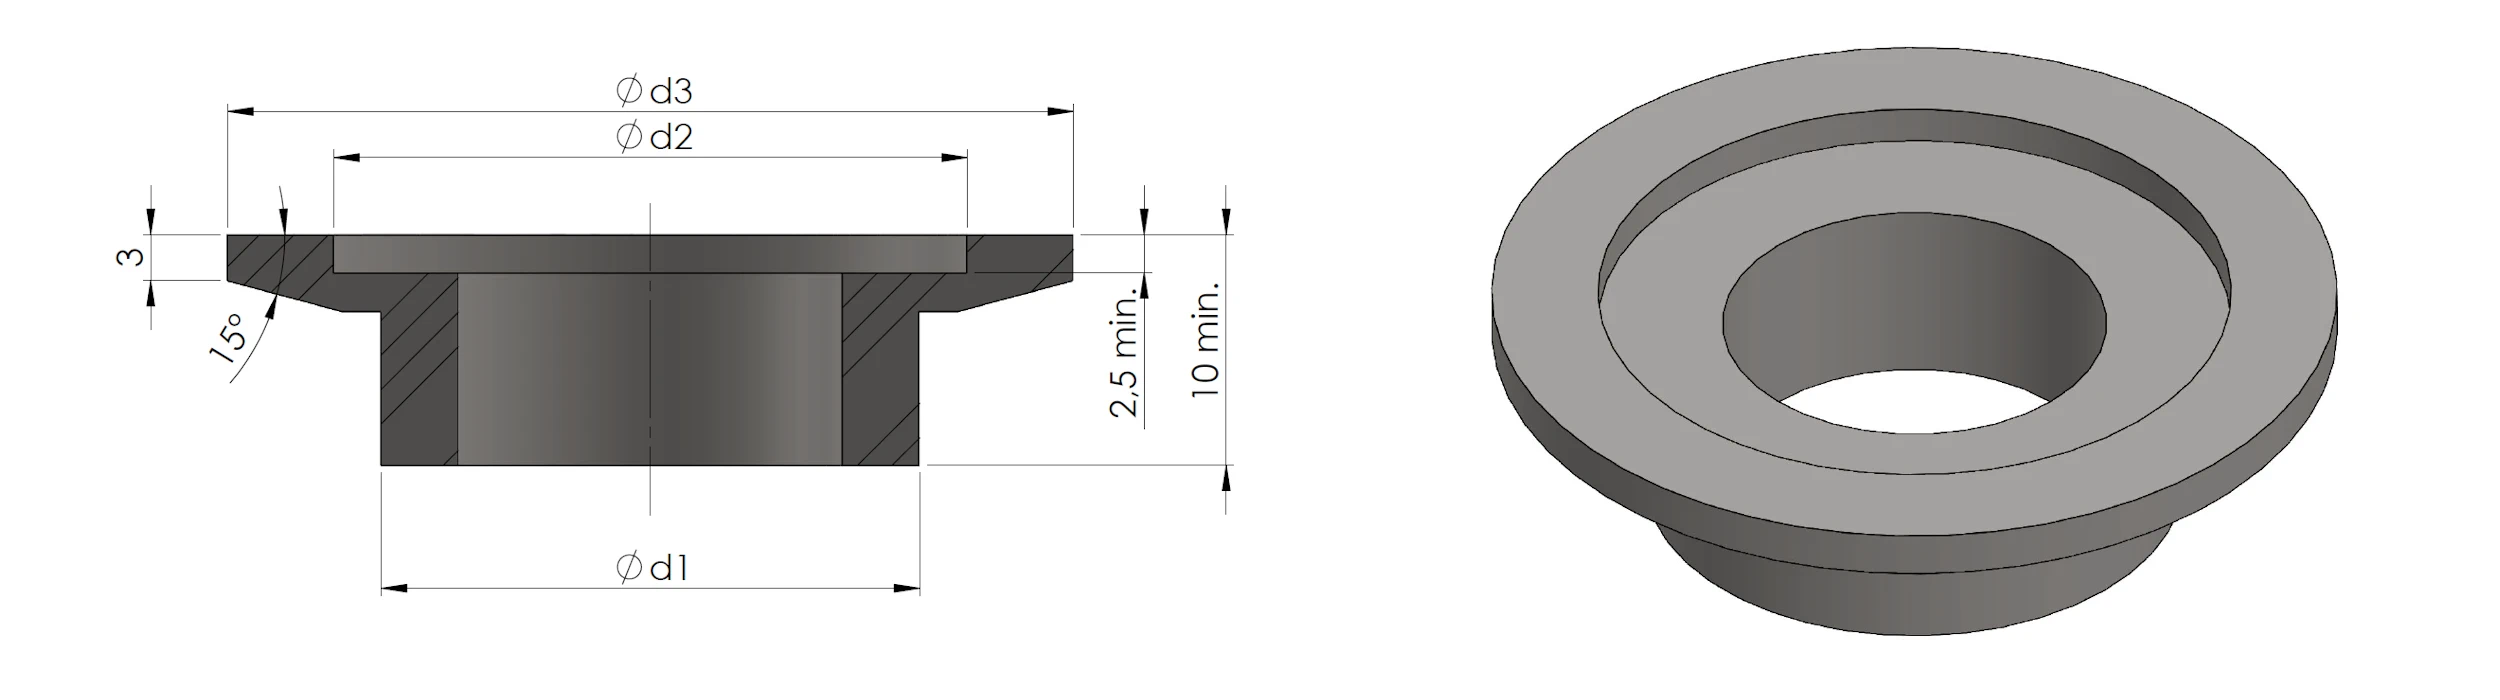 Standard dimensions for quick release coupling ISO 2861